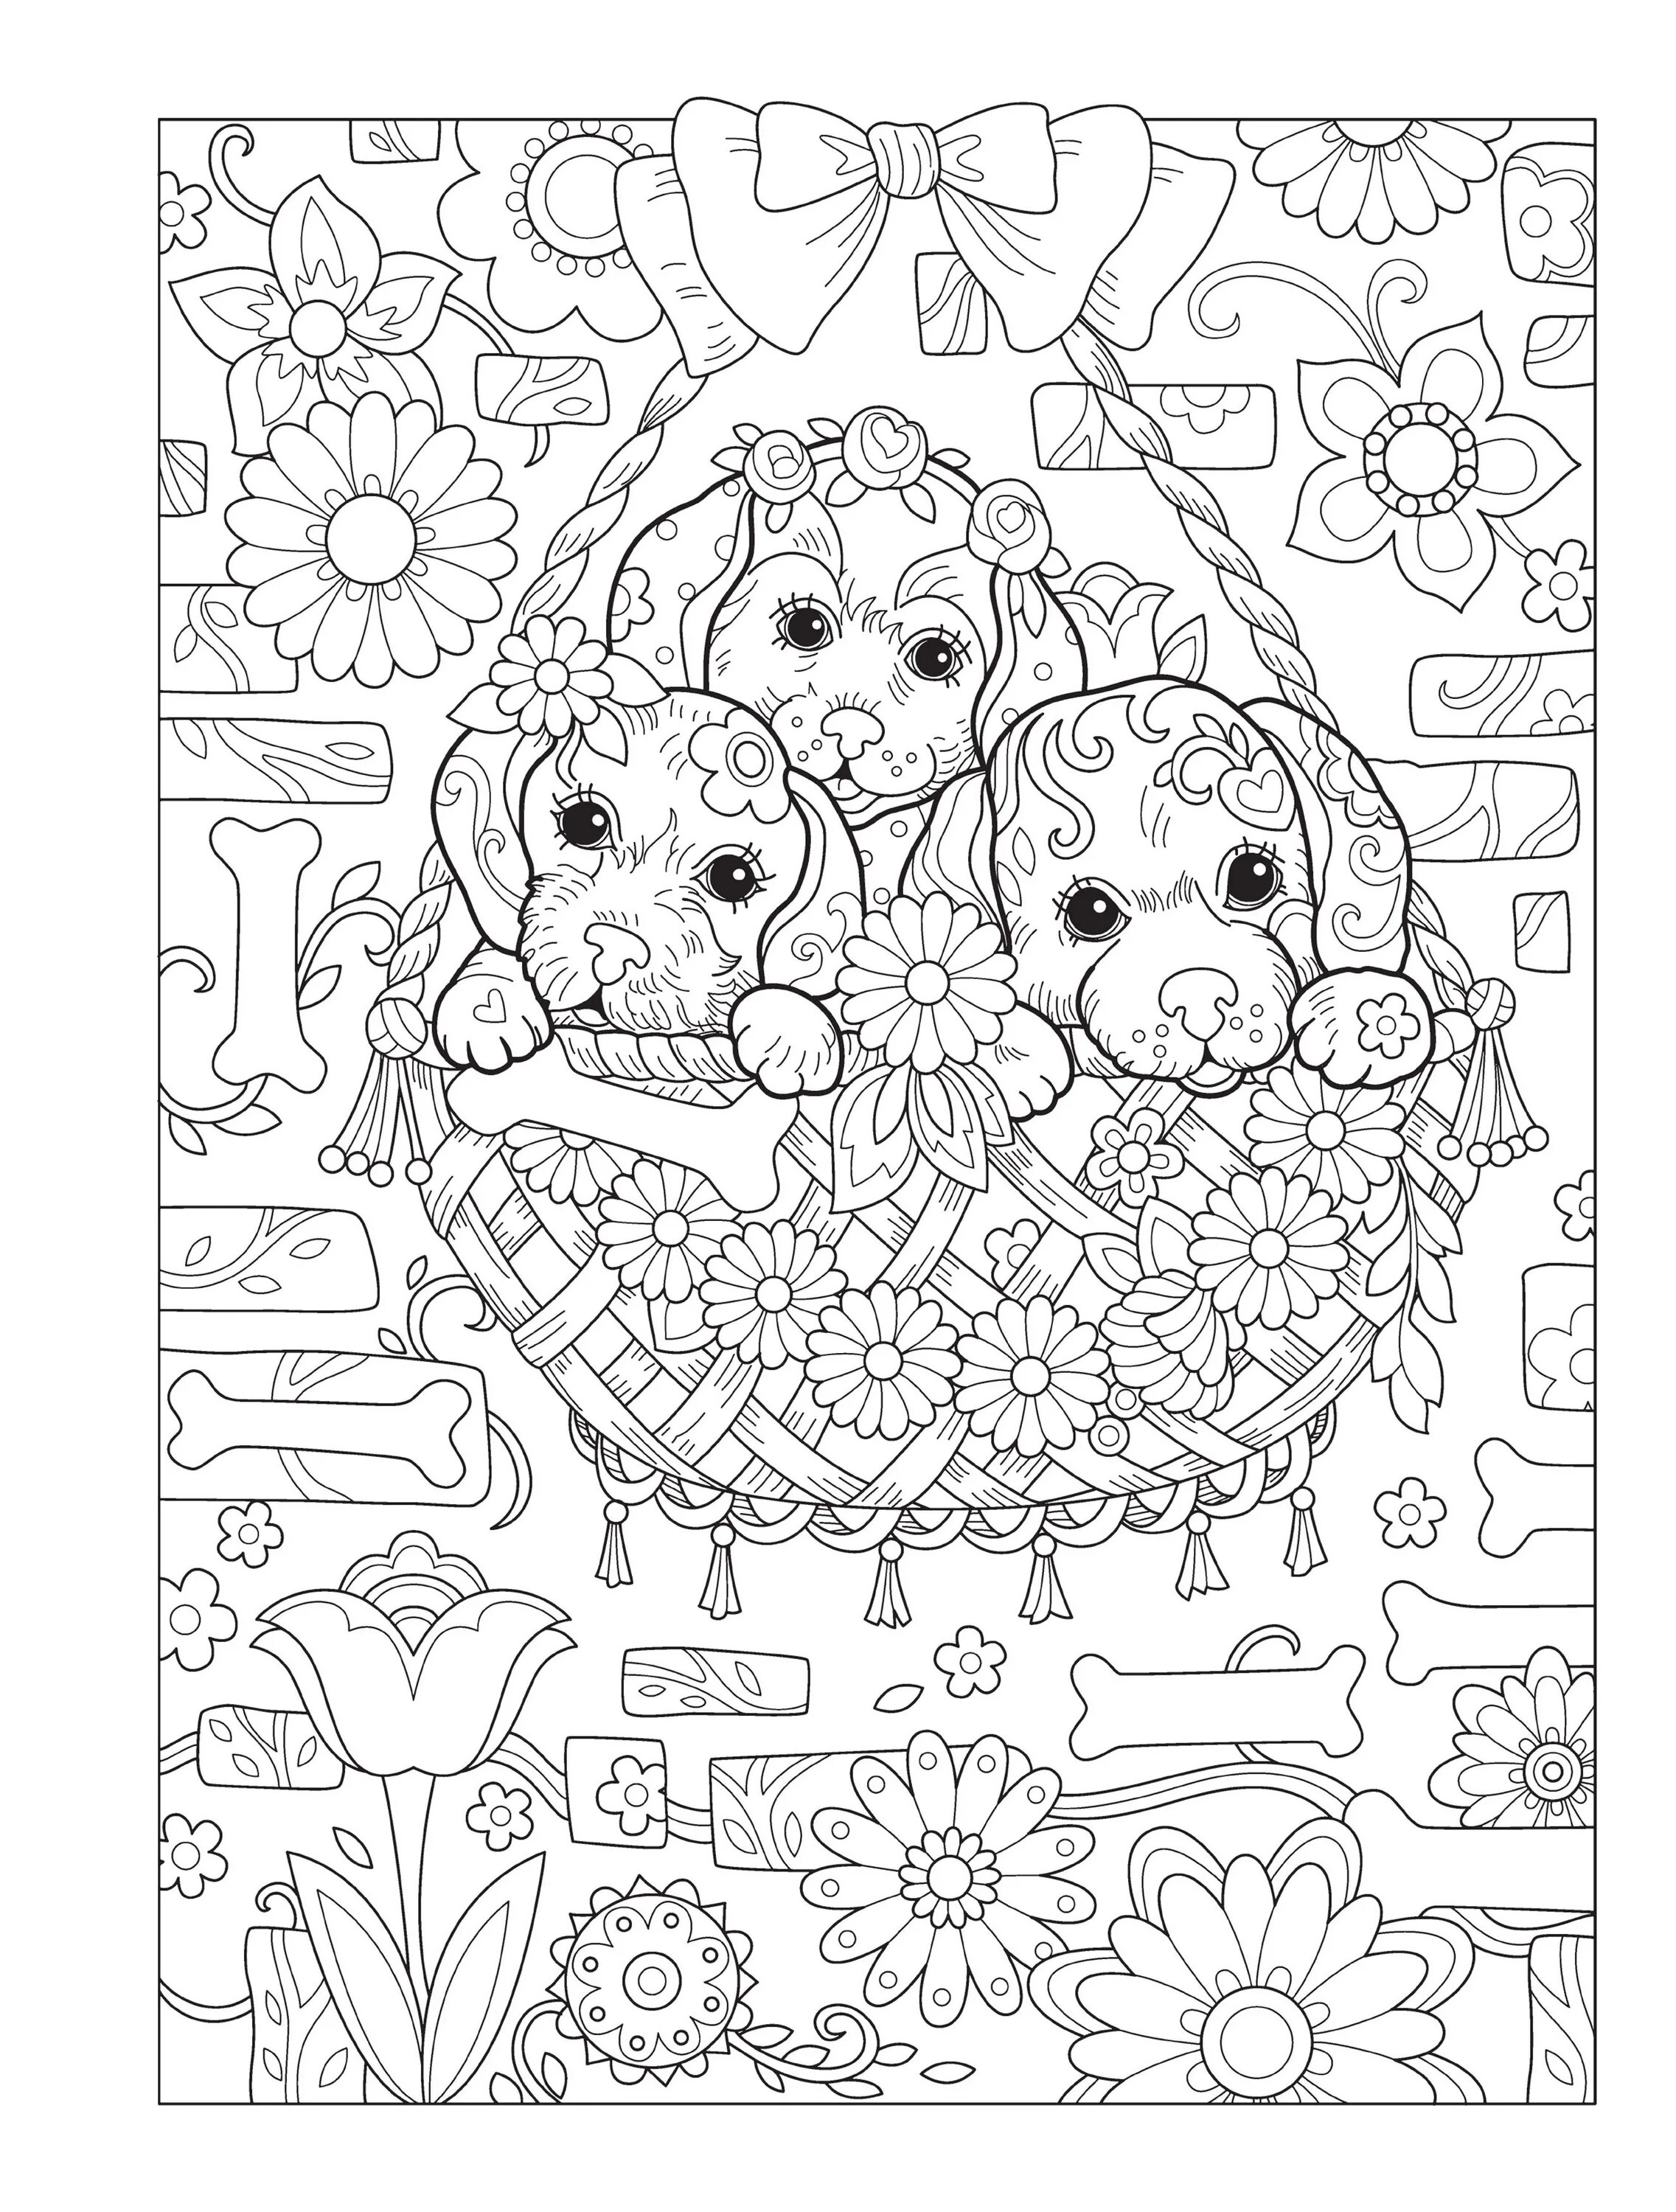 Creative coloring pages for 11 years for girls difficult